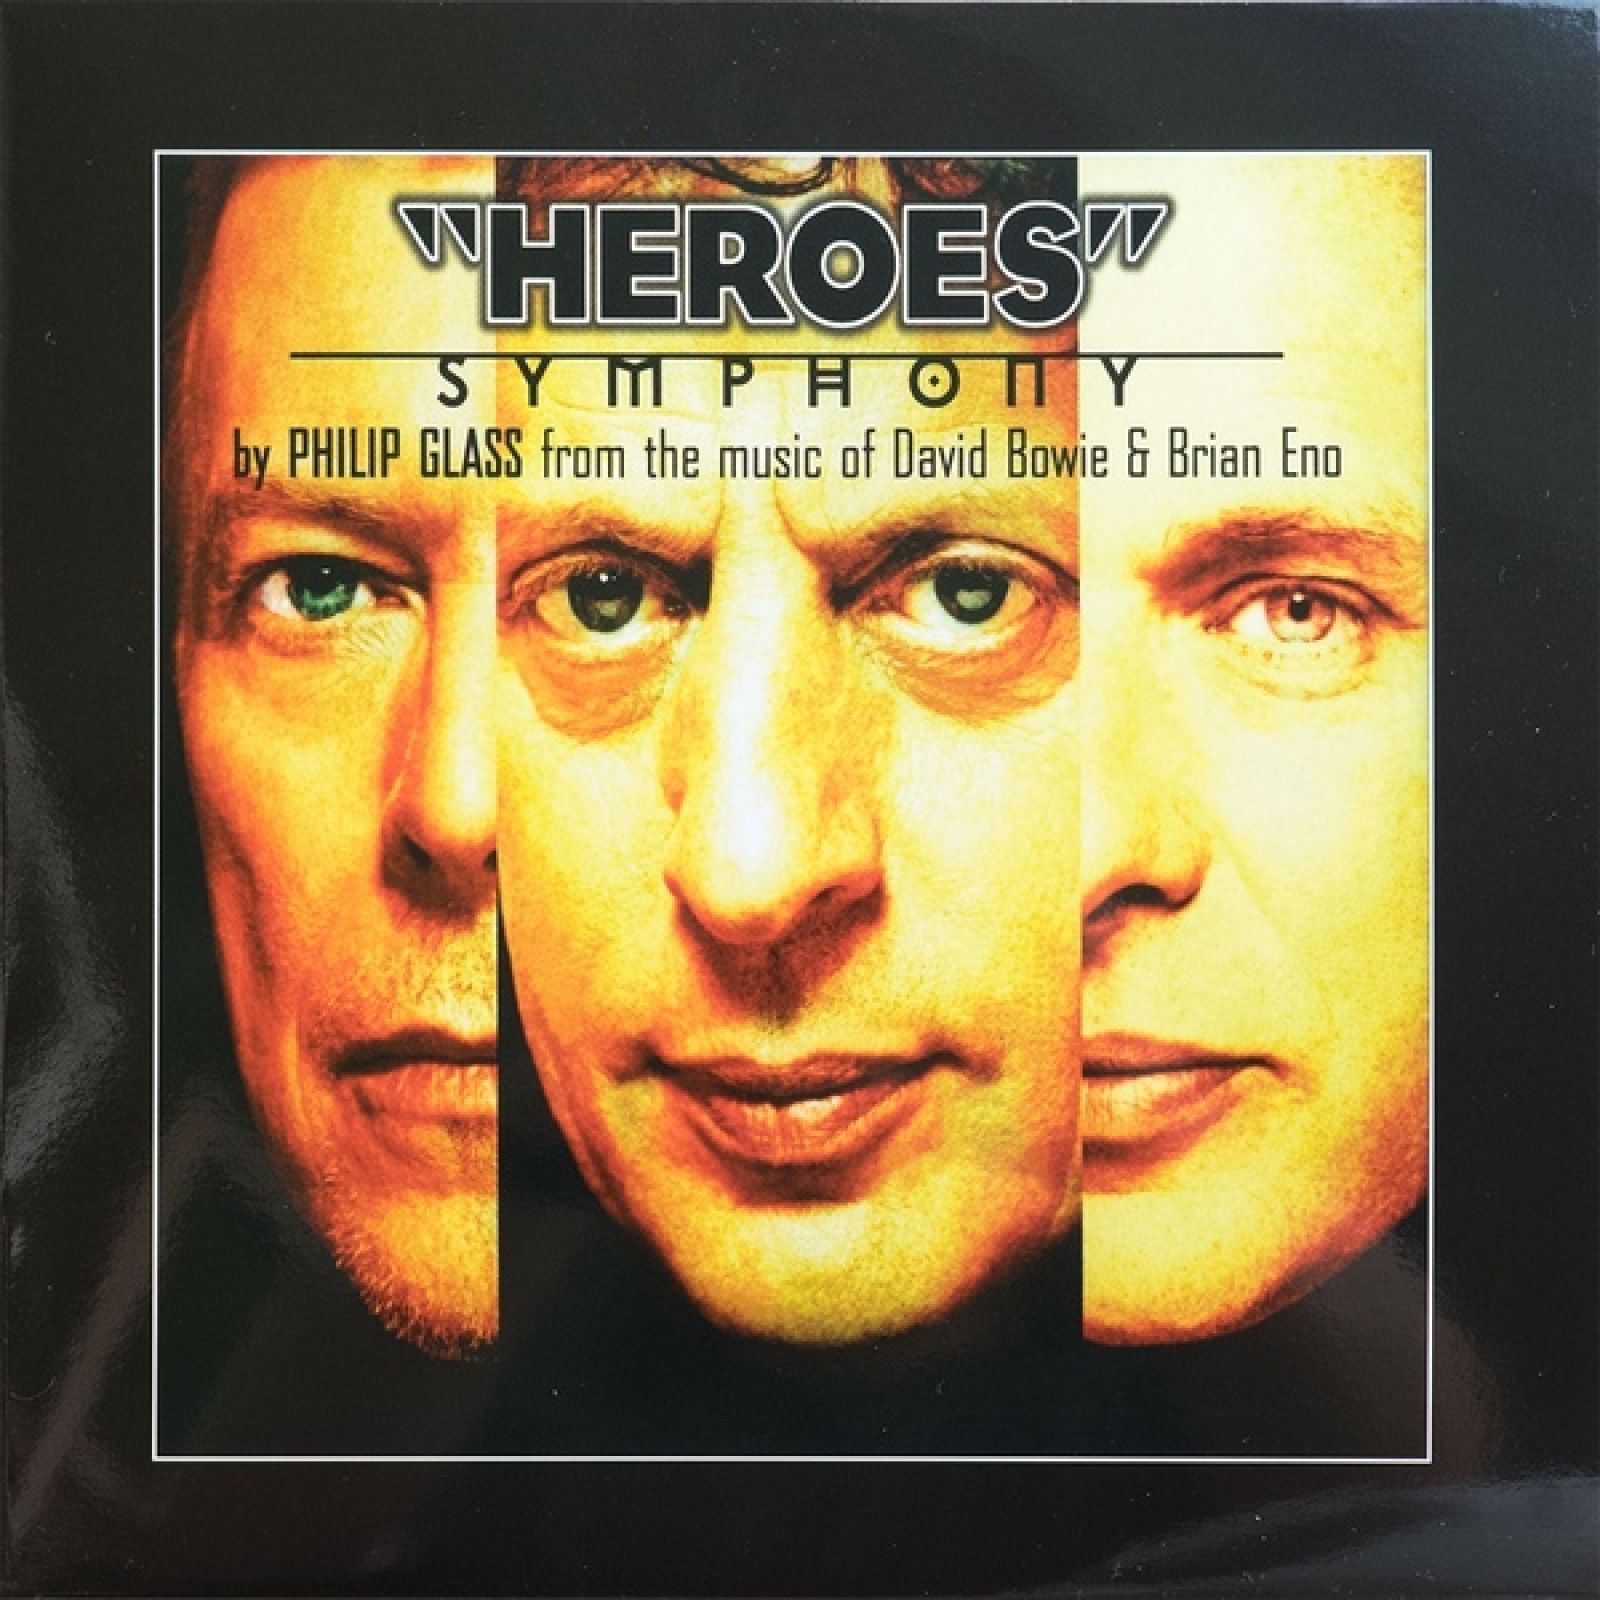 Philip Glass - The Music Of David Bowie & Brian Eno: Heroes Symphony (LP)